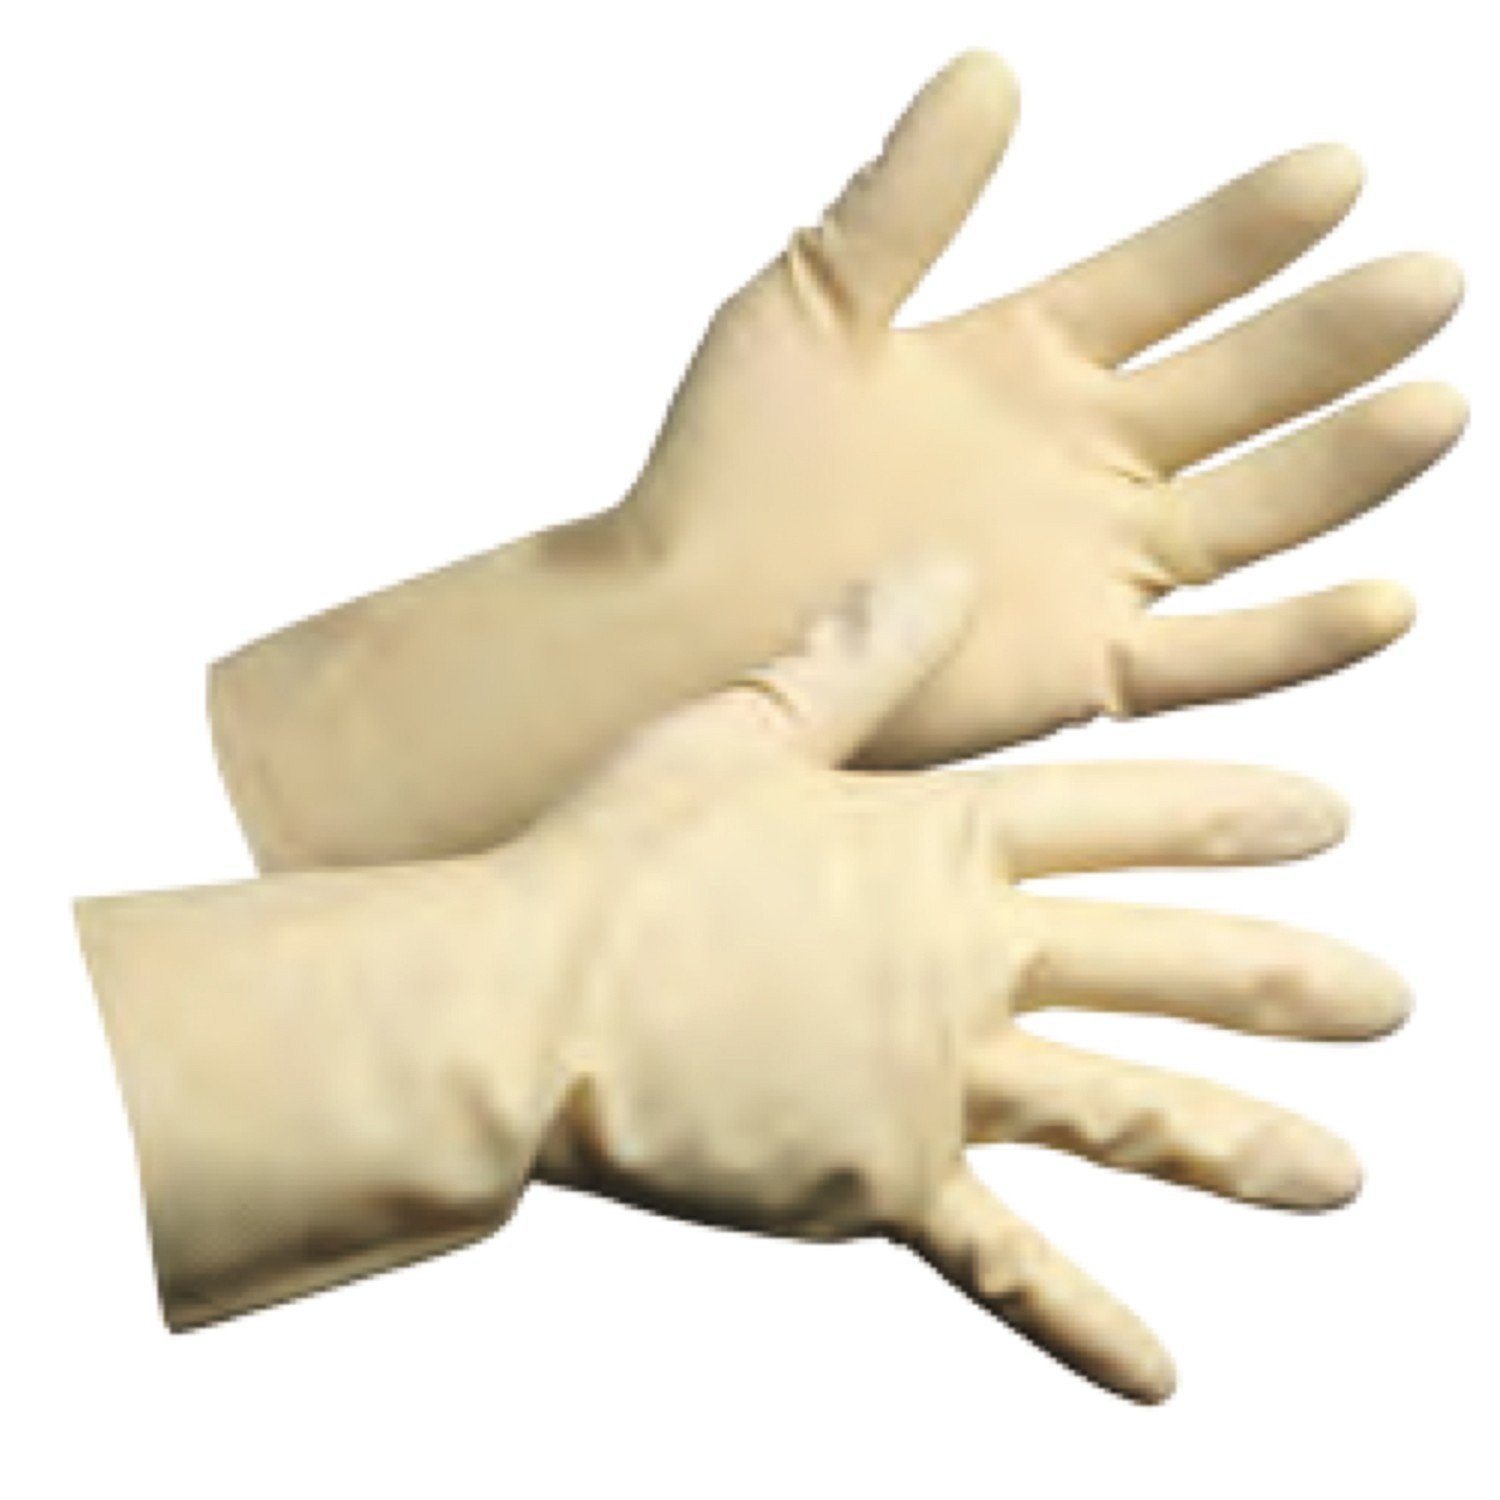 https://cdn.shopify.com/s/files/1/0023/2593/8221/products/unlined-latex-chemical-resistant-canners-gloves_d320d422-fda5-4591-8091-51514ec01c81.jpg?v=1710859863&width=1500